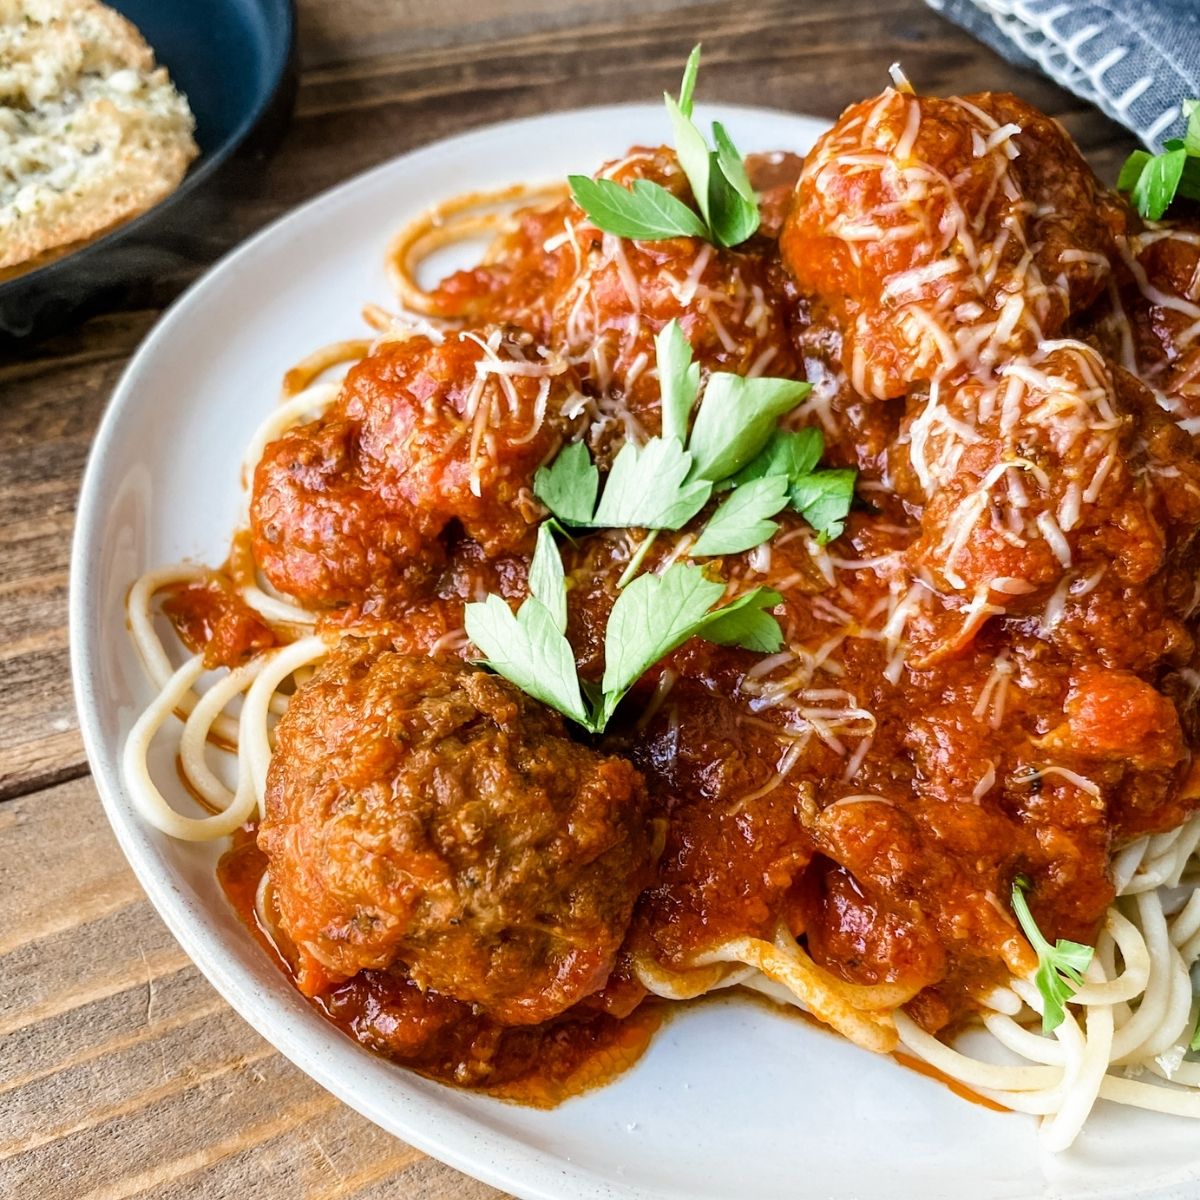 Gluten-free meatballs on a plate of spaghetti with sauce and gluten free garlic bread next to it.